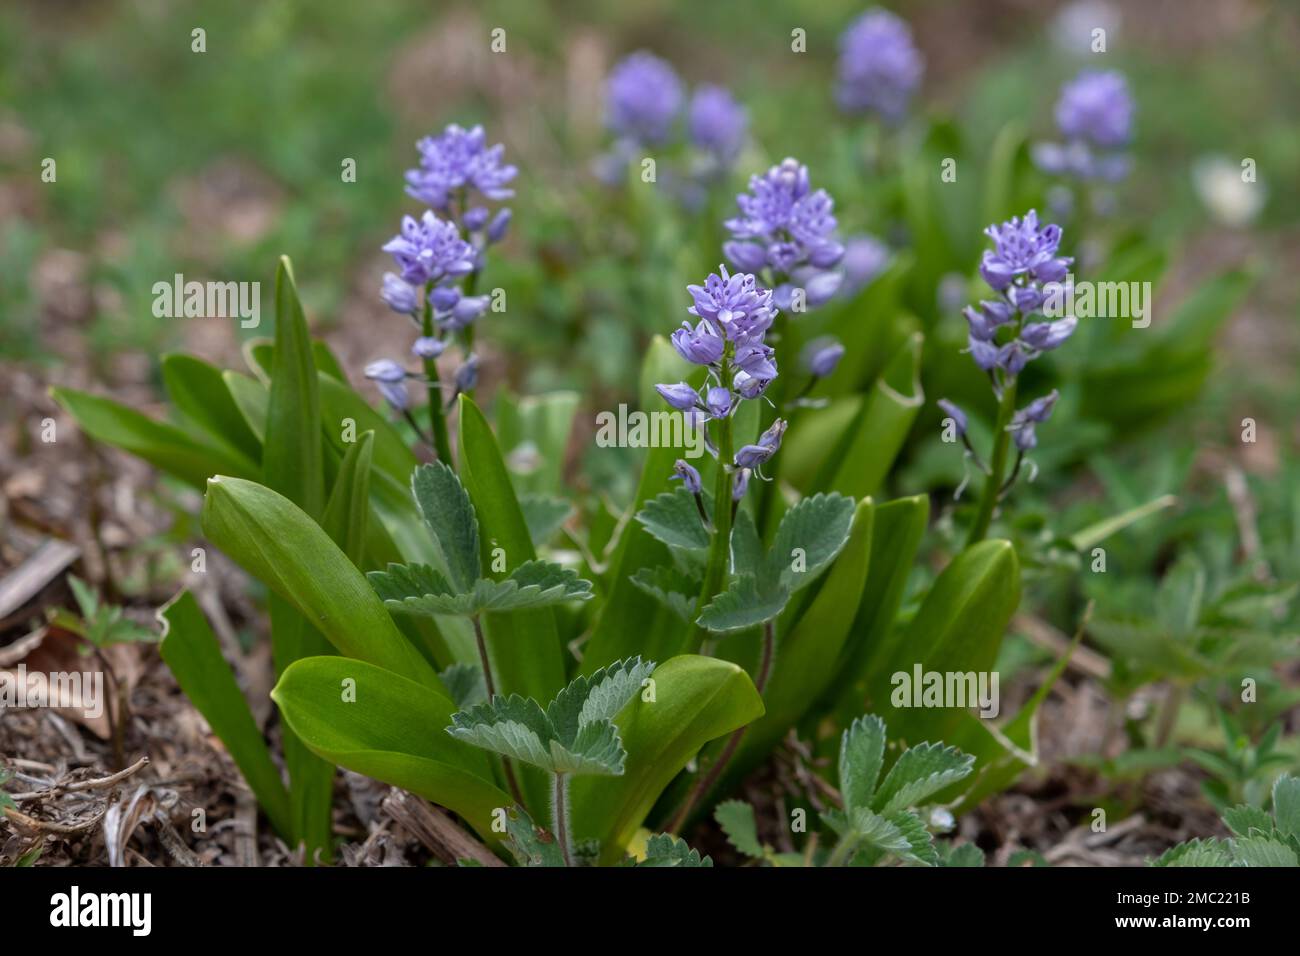 Pyrenean squill ( Scilla lilio-hyacinthus) purple flowers Stock Photo